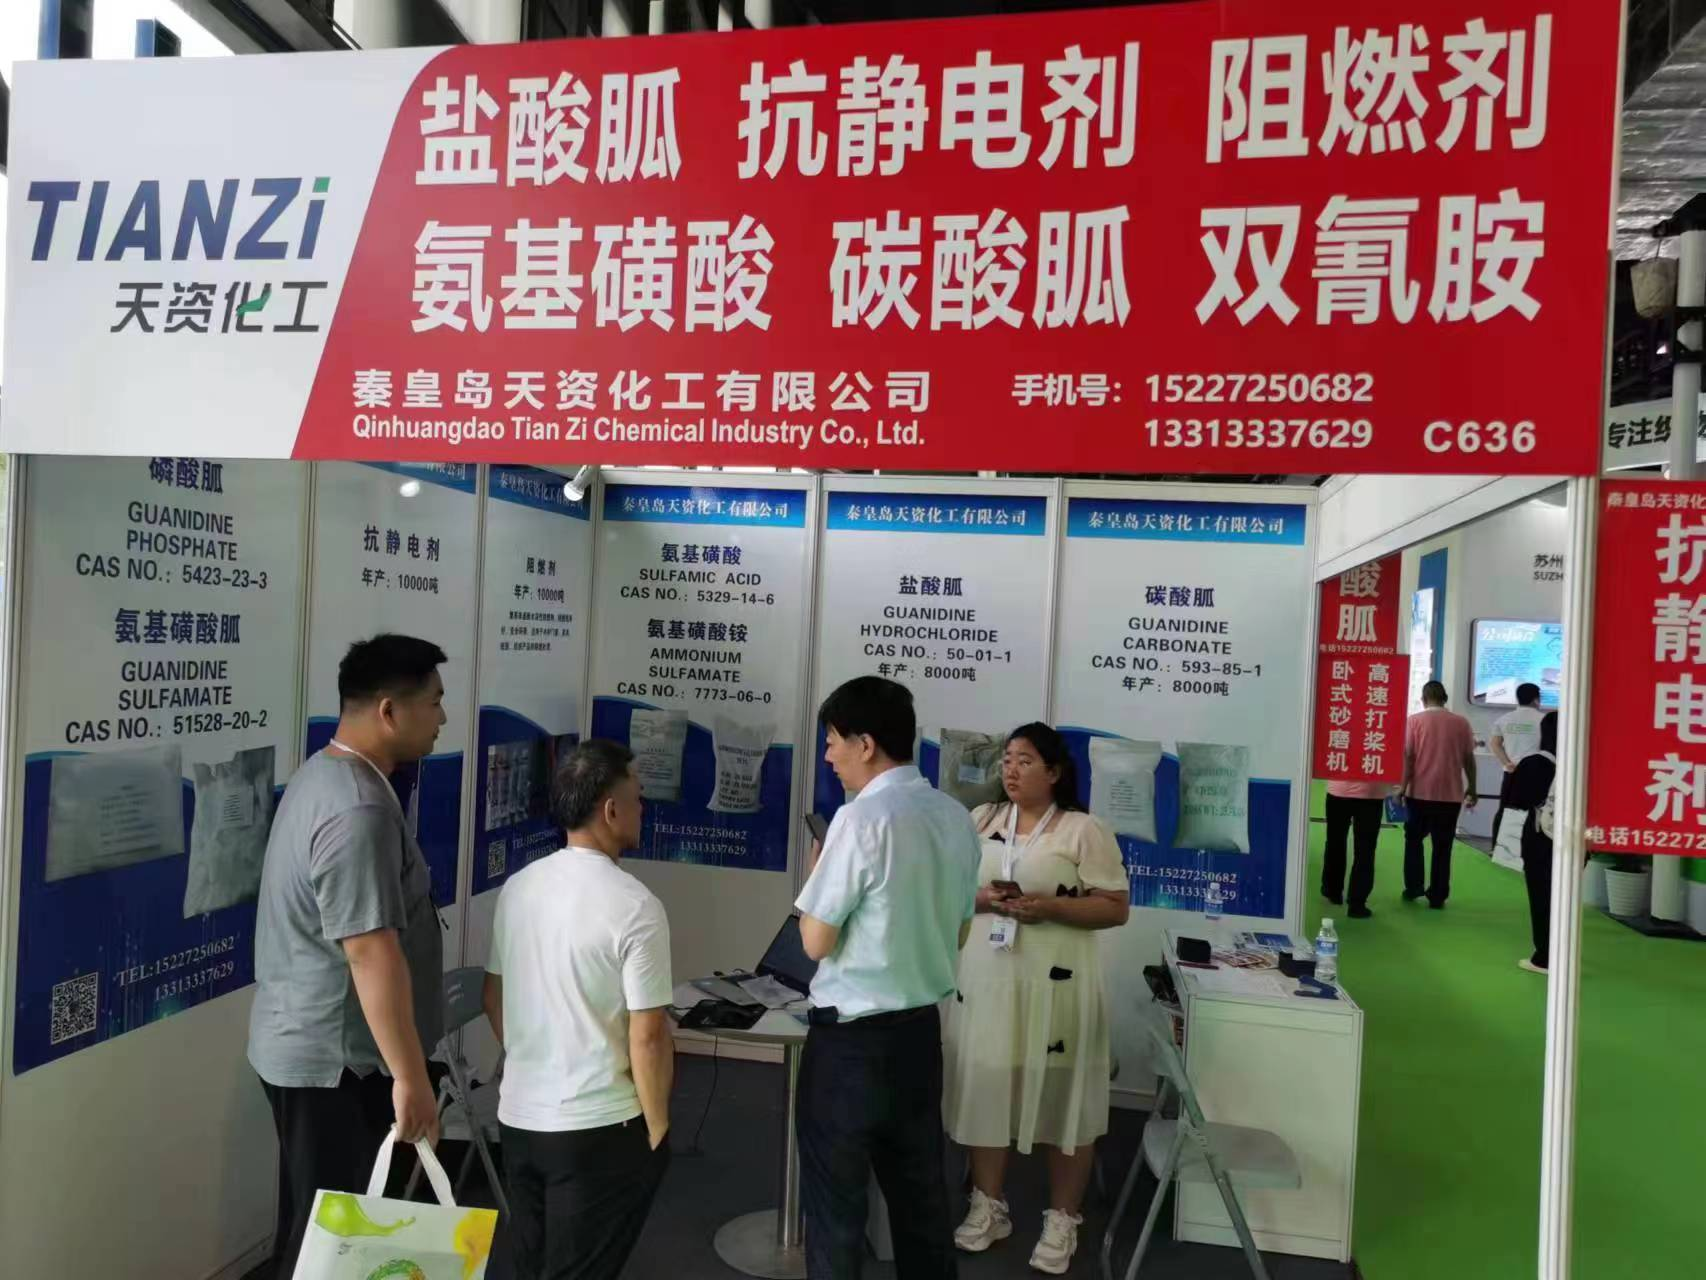 Qinhuangdao Tianzi Chemical Co., Ltd. sincerely invites you to participate in the 22nd International Dye Industry, Organic Pigments, and Textile Chemicals Exhibition